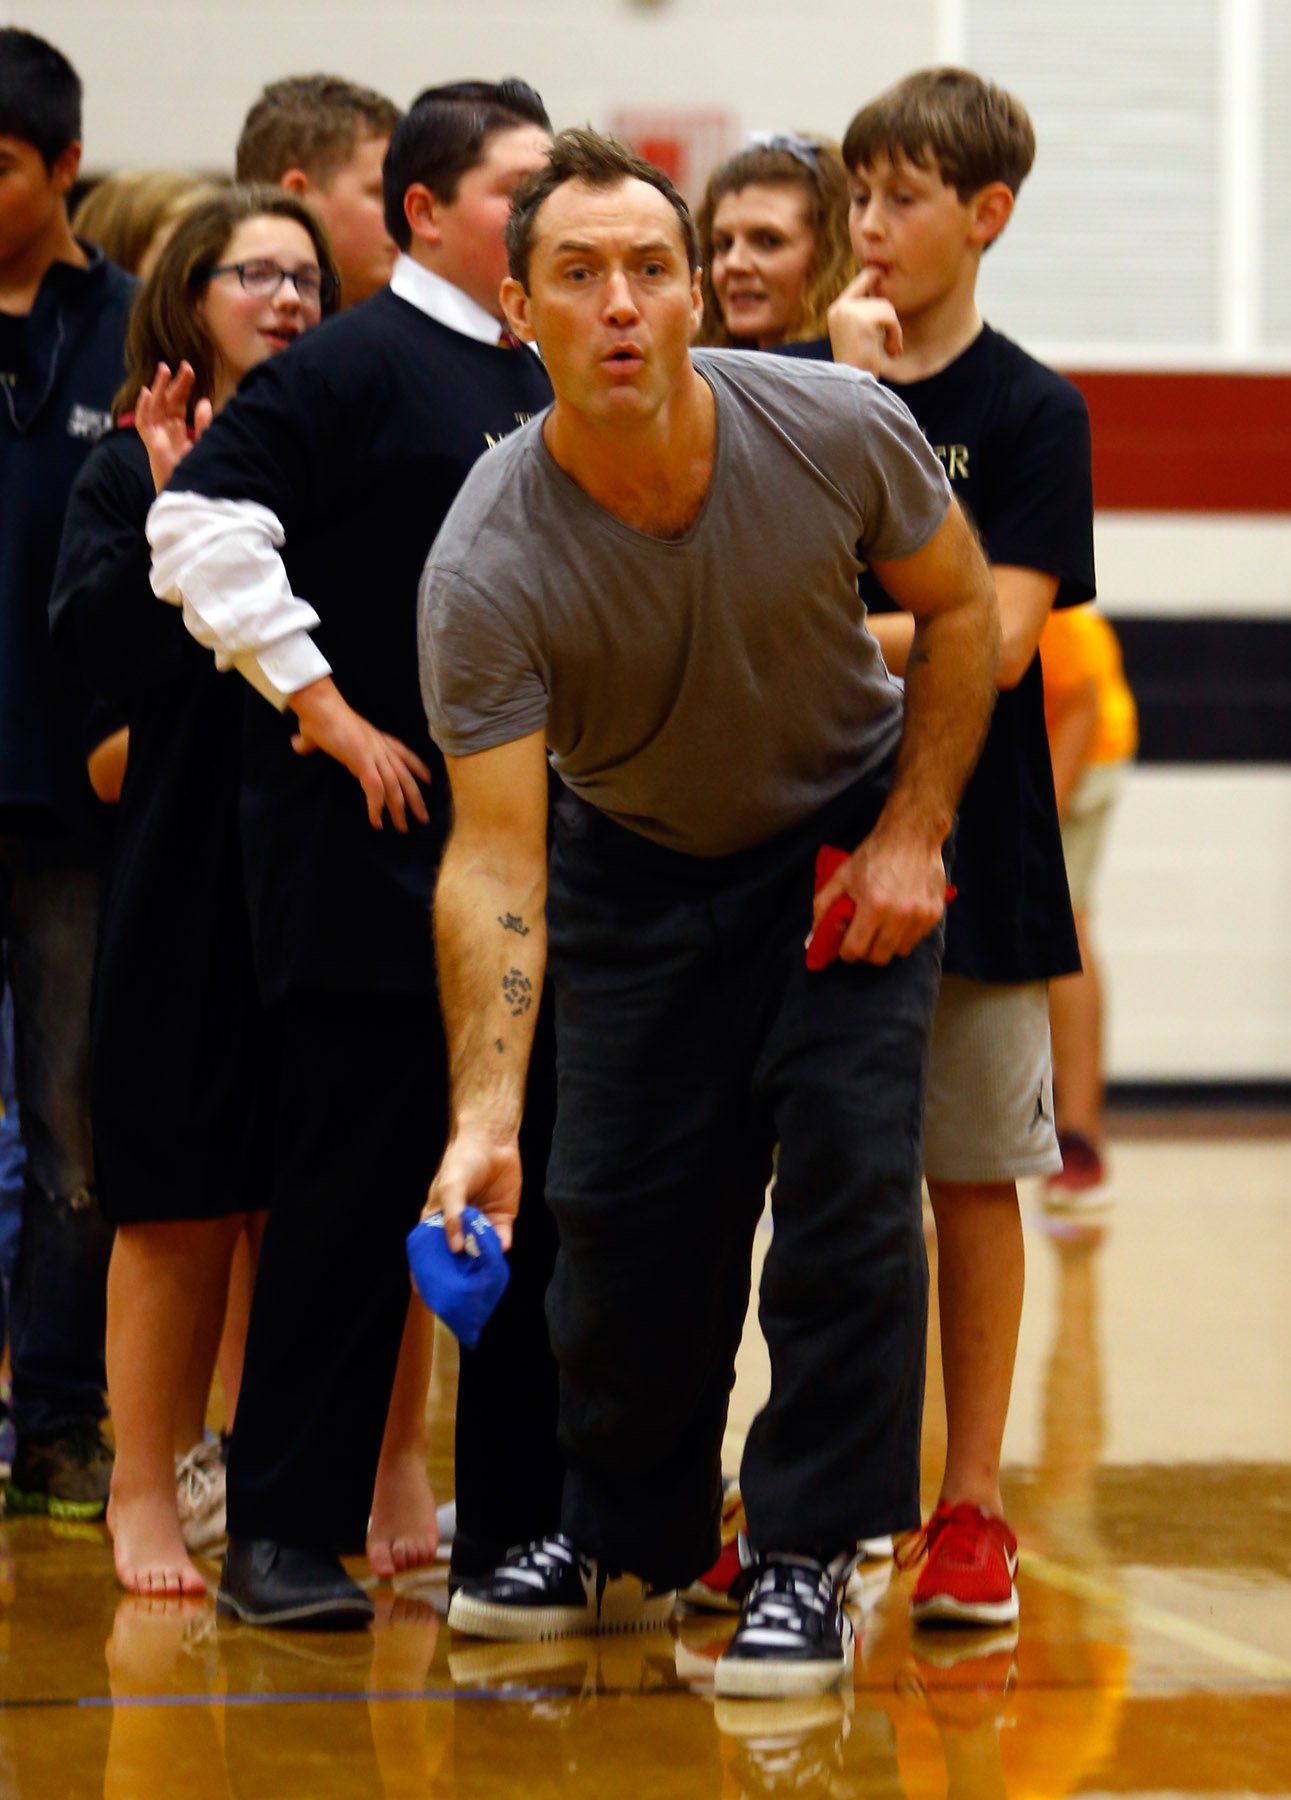 Jude Law from “Fantastic Beasts: The Crimes of Grindelwald” participates in a game to help celebrate Wizarding World Day at Parkside Middle School in Baileyton, AL.  (Photo by Butch Dill/Getty Images)